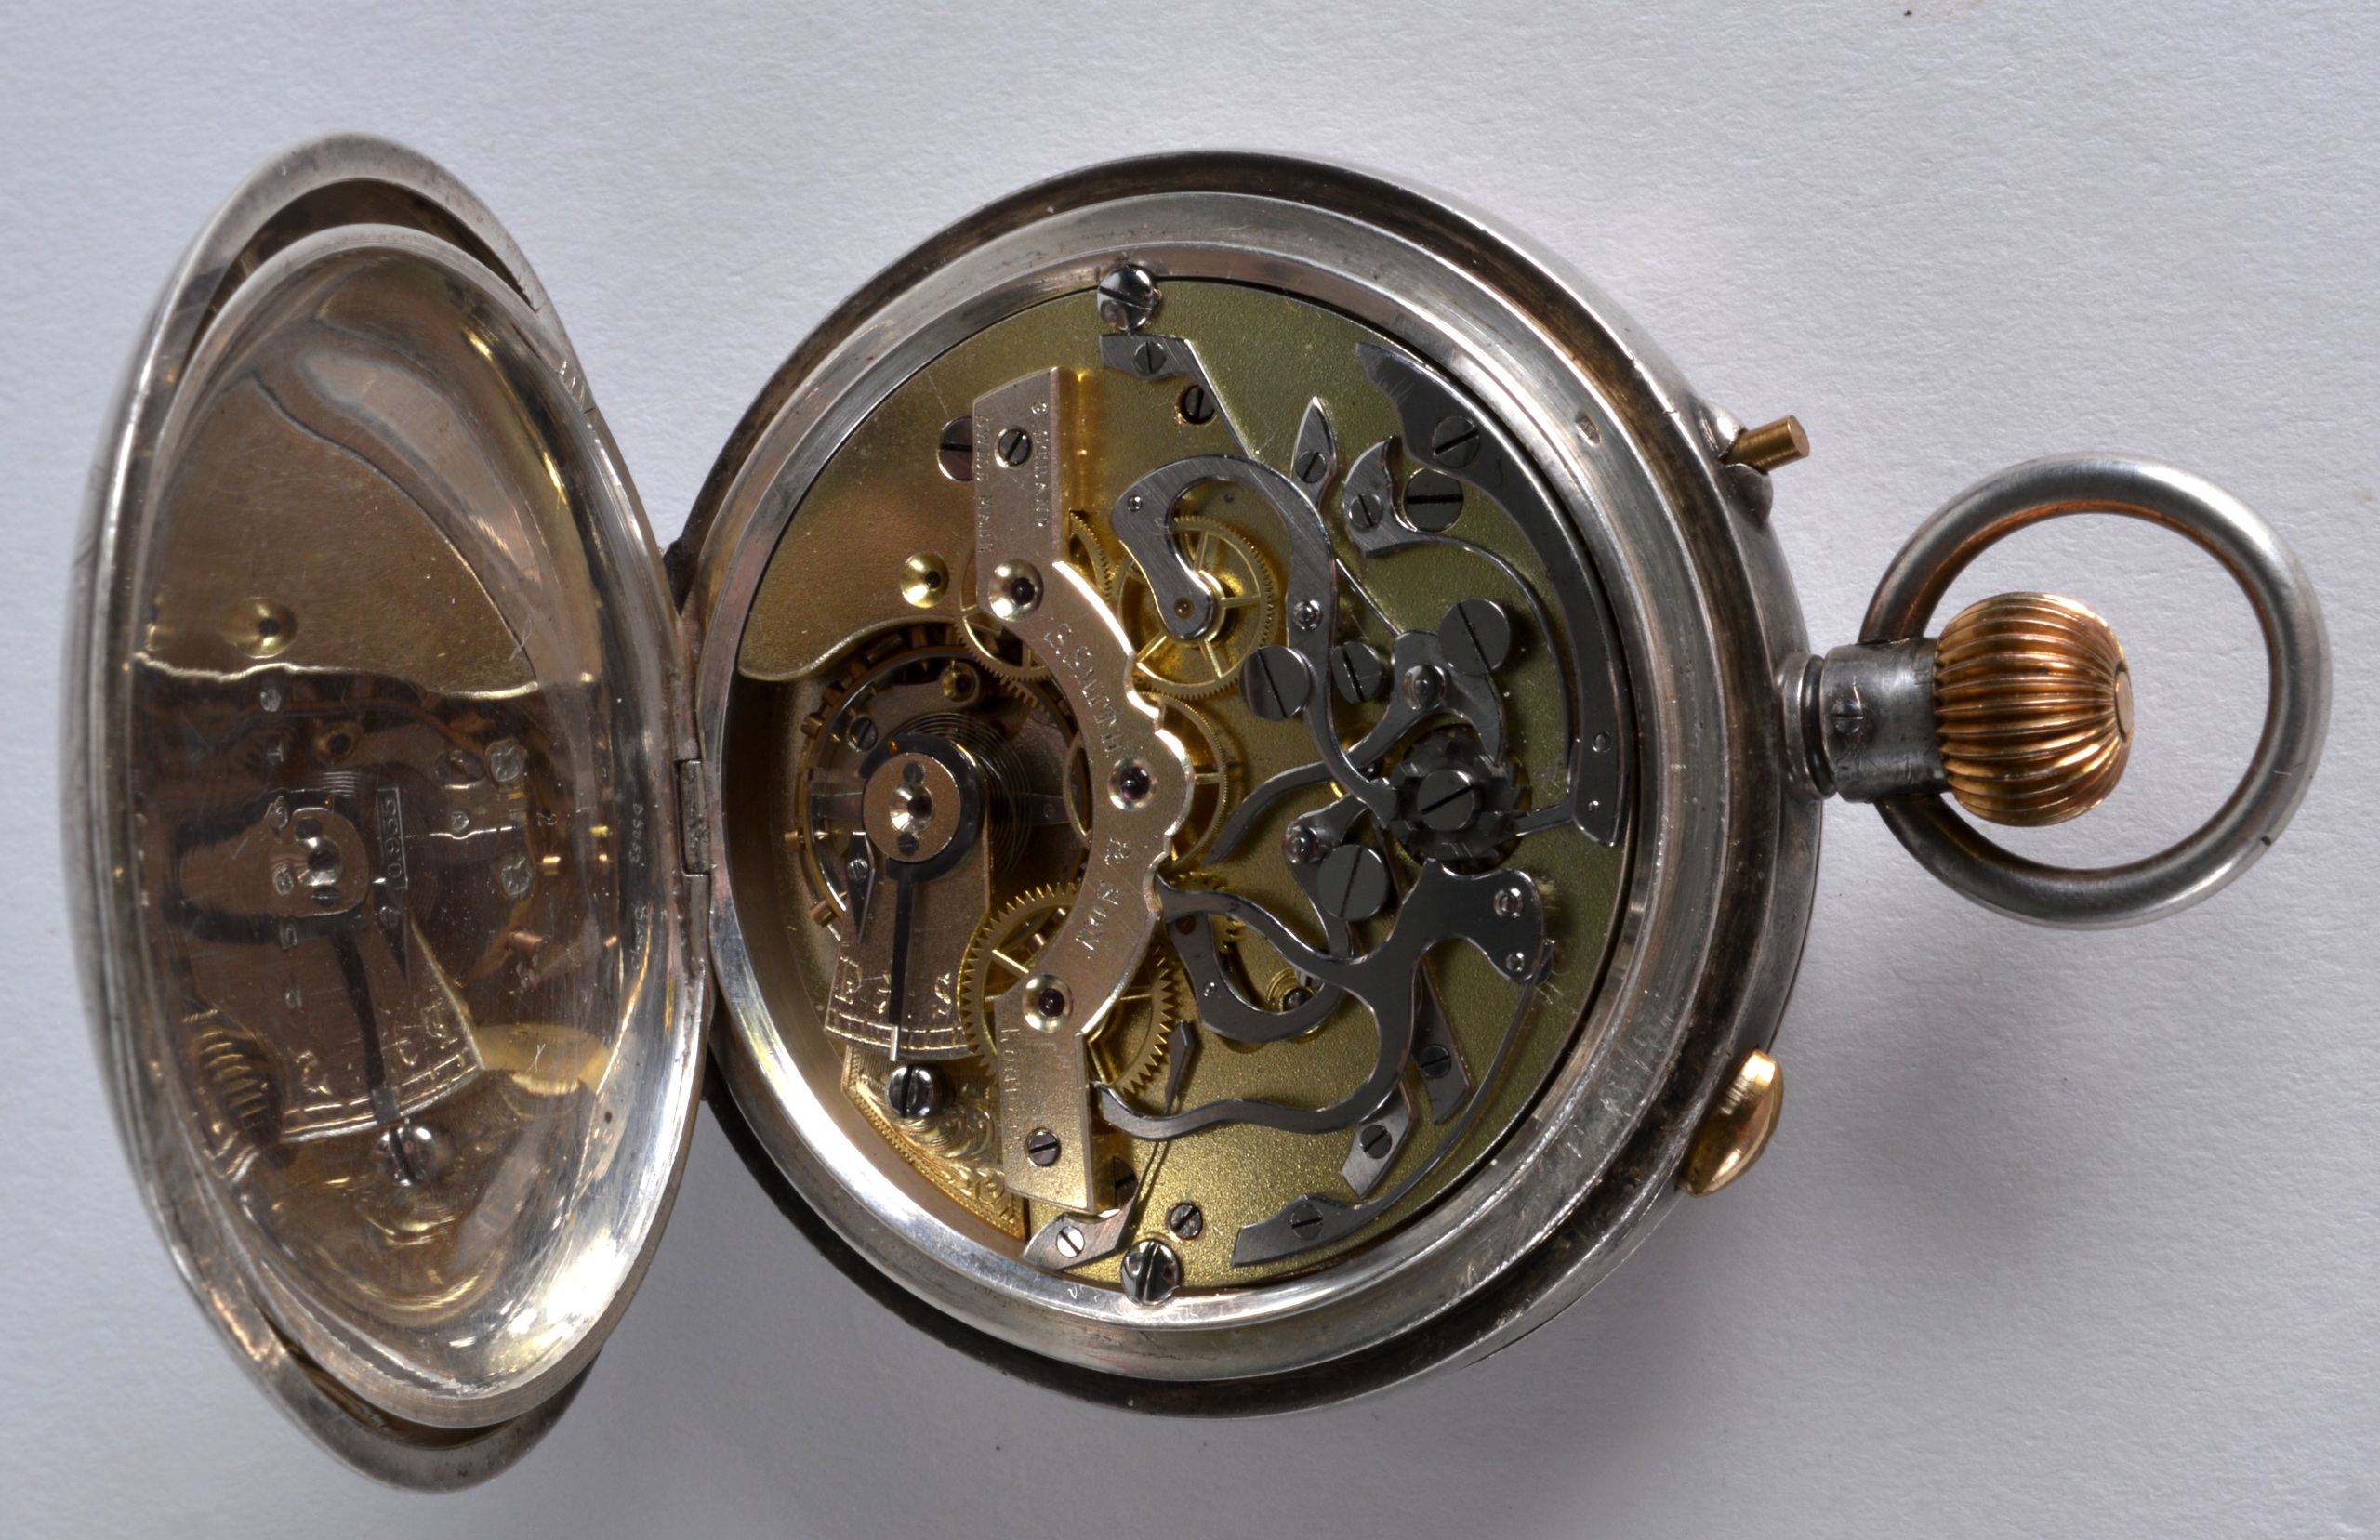 A GOOD 19TH/20TH CENTURY SWISS MADE TRIPLE DIAL GENTLEMANS POCKET WATCH the dial with distance - Image 2 of 2